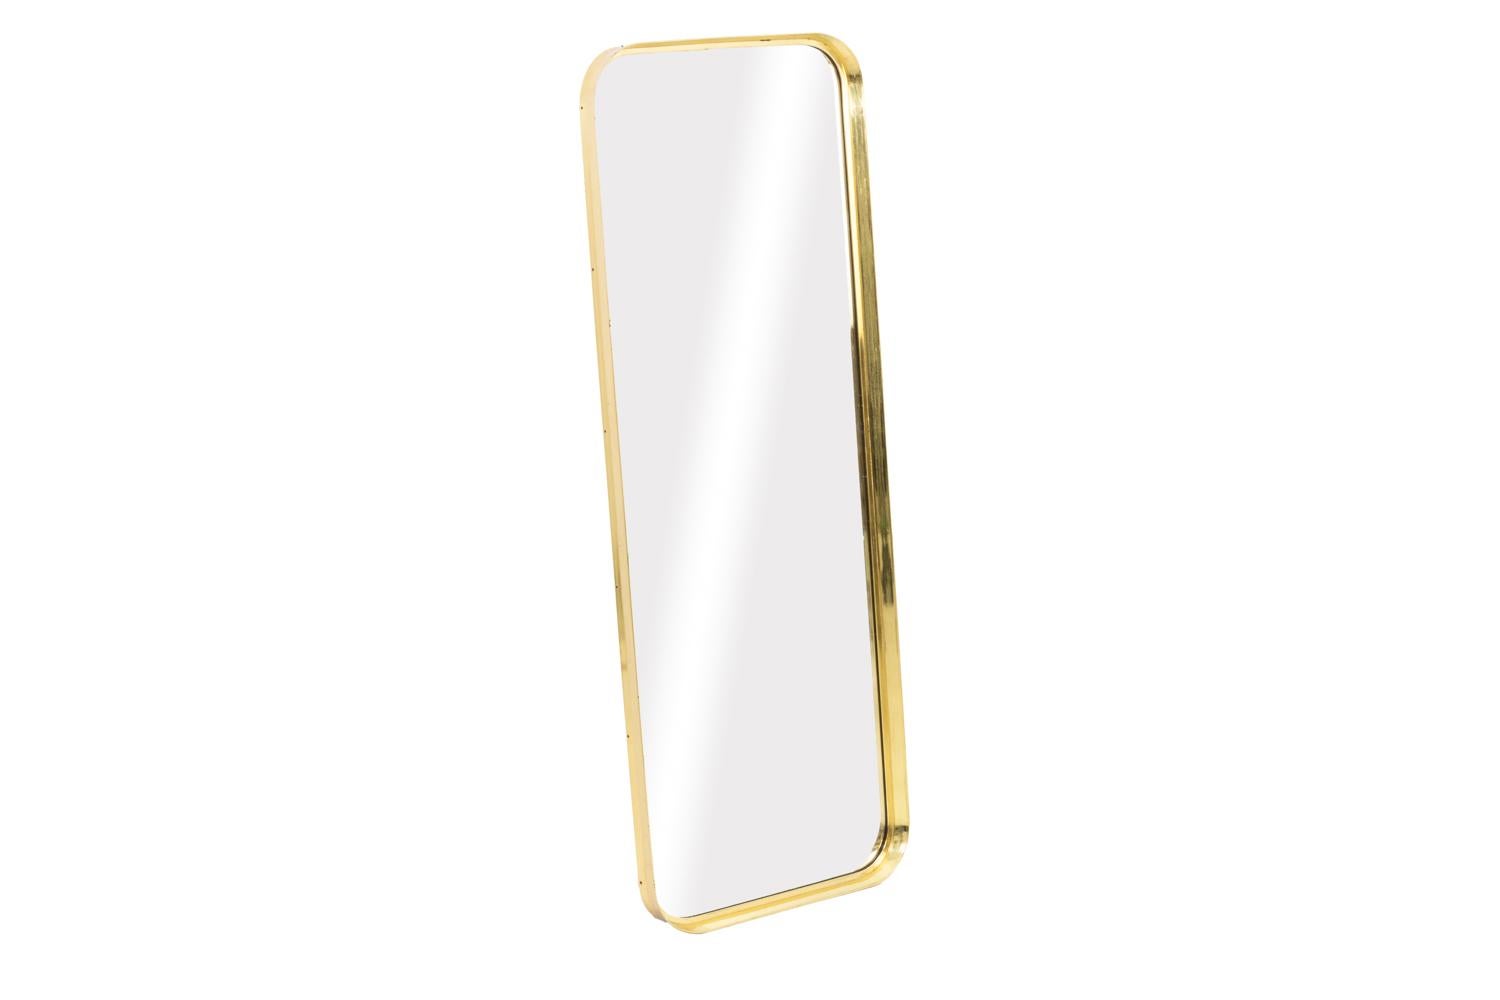 Rectangular mirror in gilt brass with curved angles and with an edge forming a depression.

Scandinavian or German work realized in the 1970s.